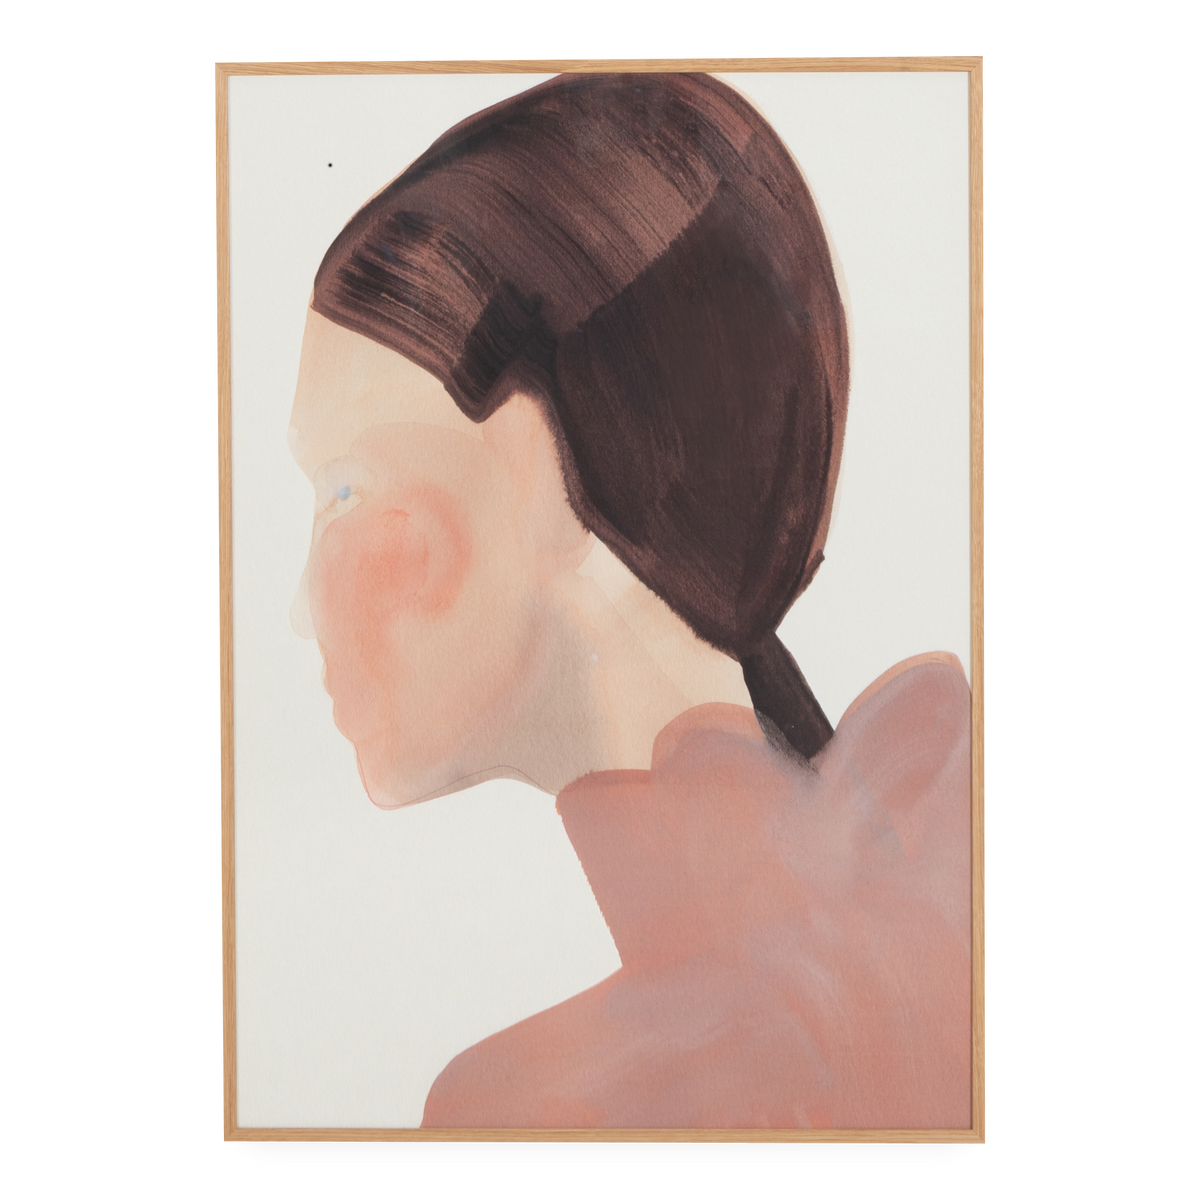 Providing an amicable tone and perfect in a contemporary environment, The Ponytail captivates the viewer with its pleasant neutral palette and organic brush strokes.